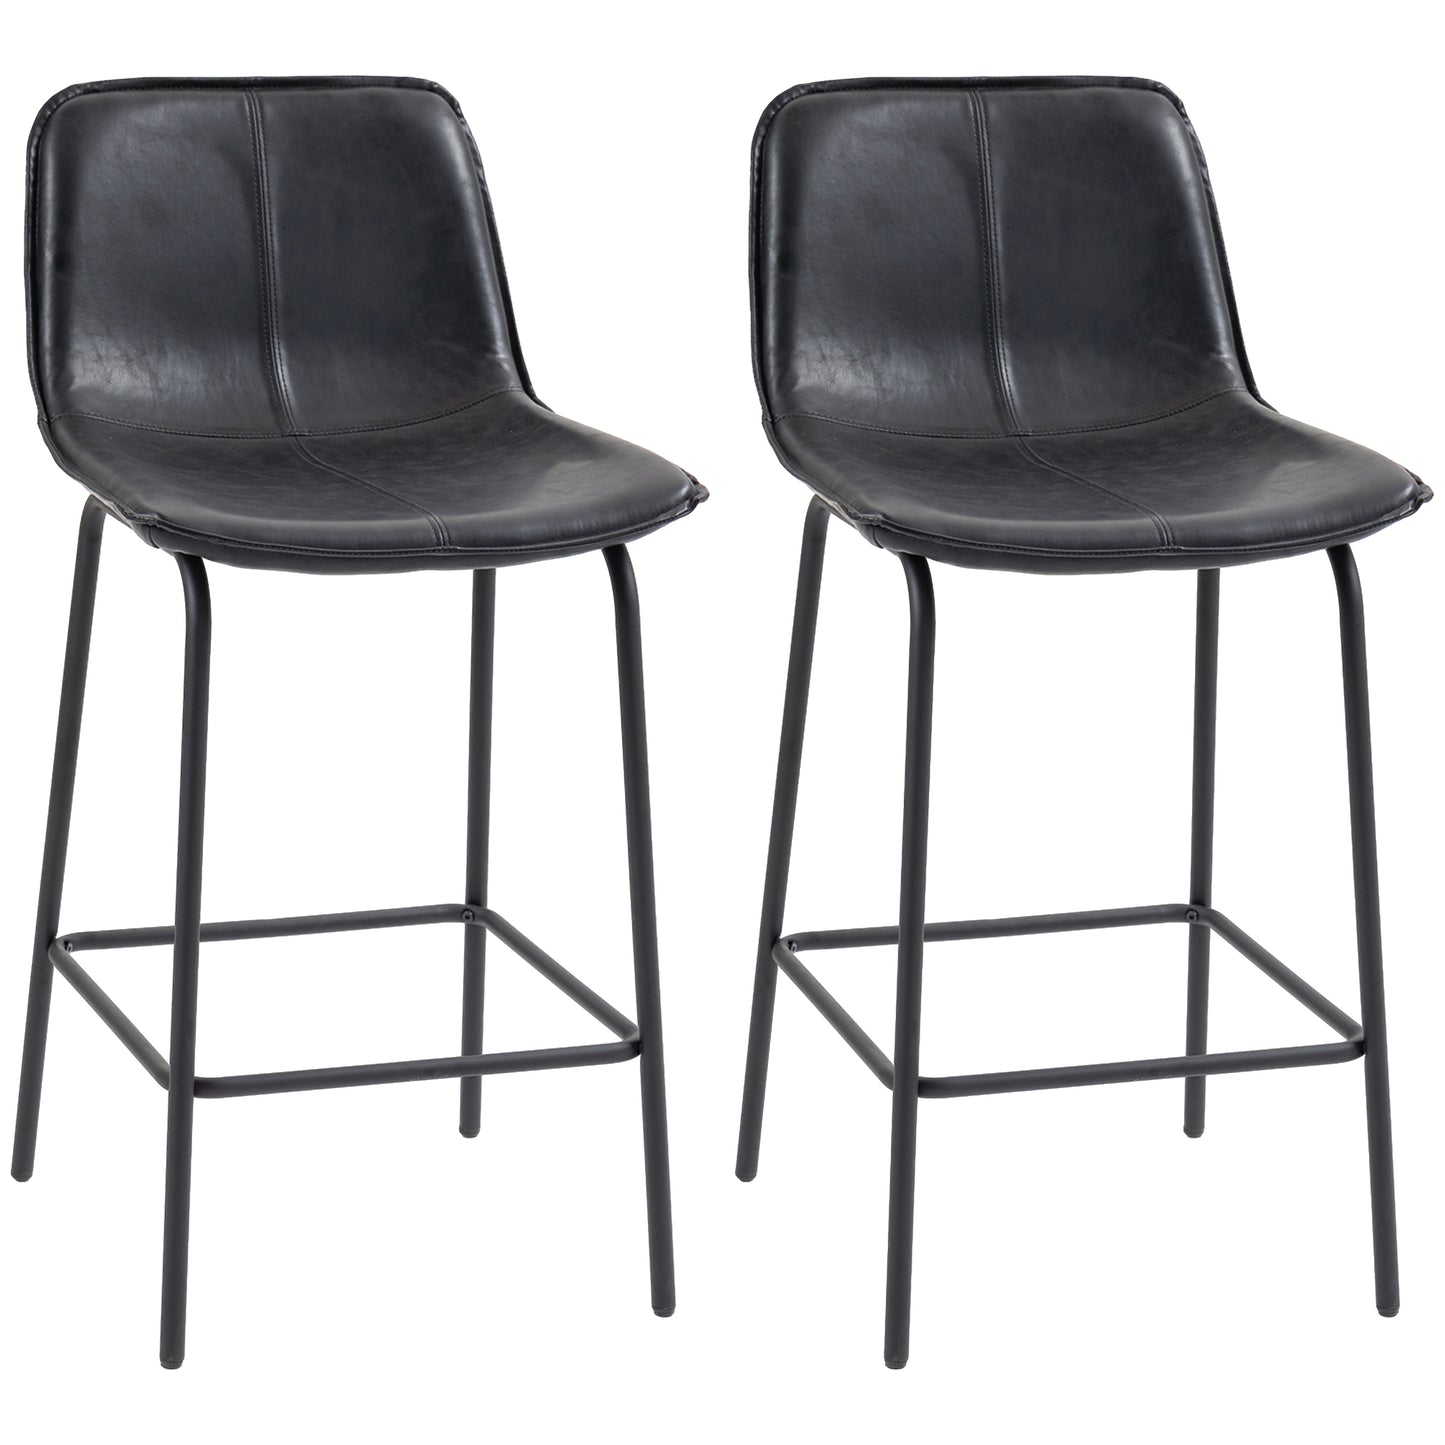 SET OF 2 Upholstered Bar Stools Counter Height with Steel Legs